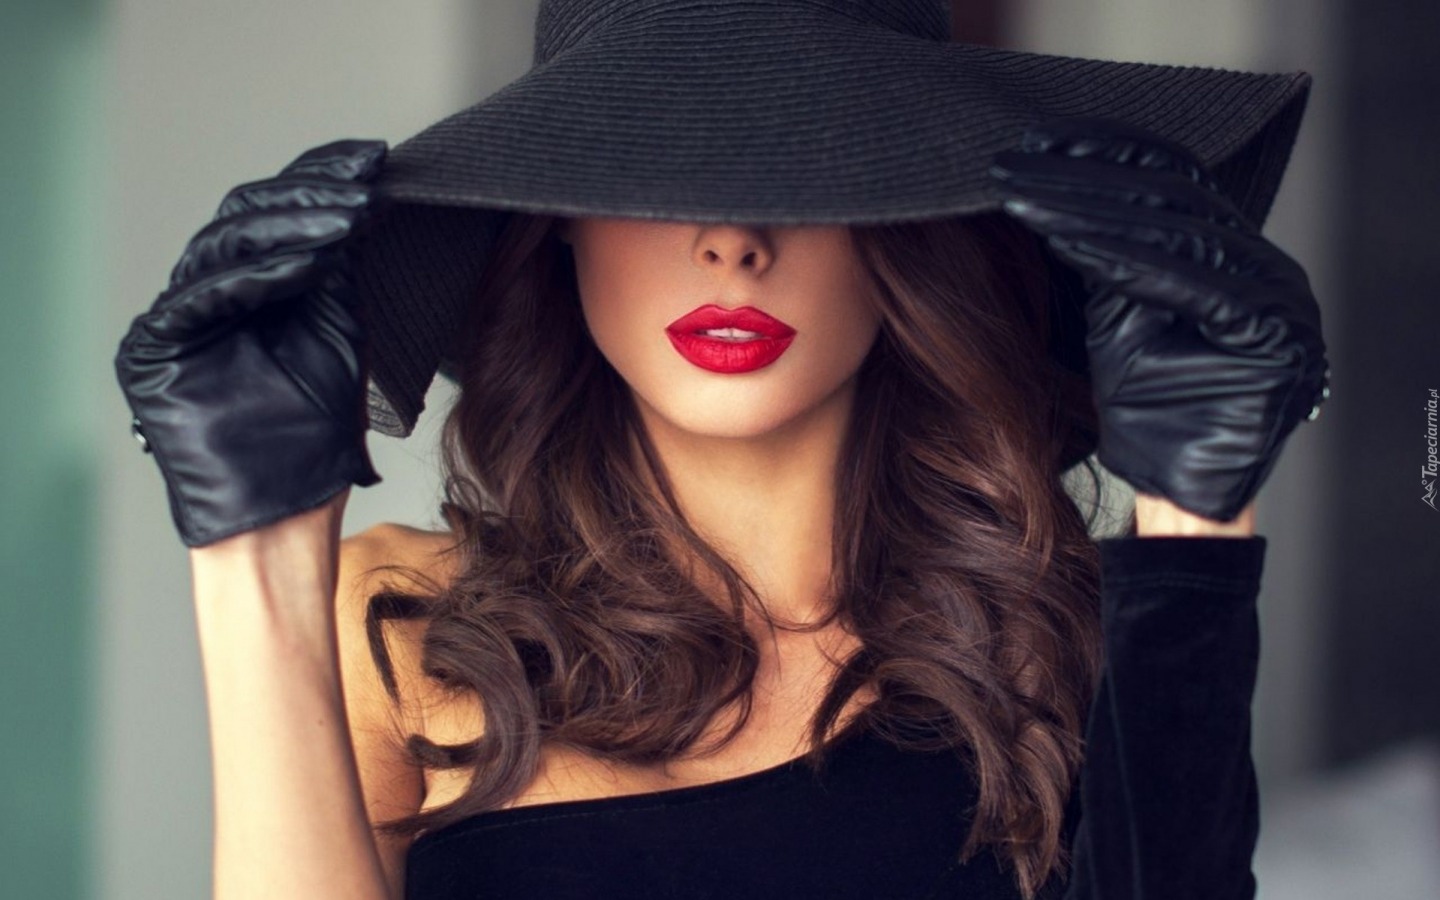 People 1440x900 model brunette glamour red lipstick black gloves gloves long hair black hat classy black dress millinery women with hats open mouth black clothing women watermarked closeup